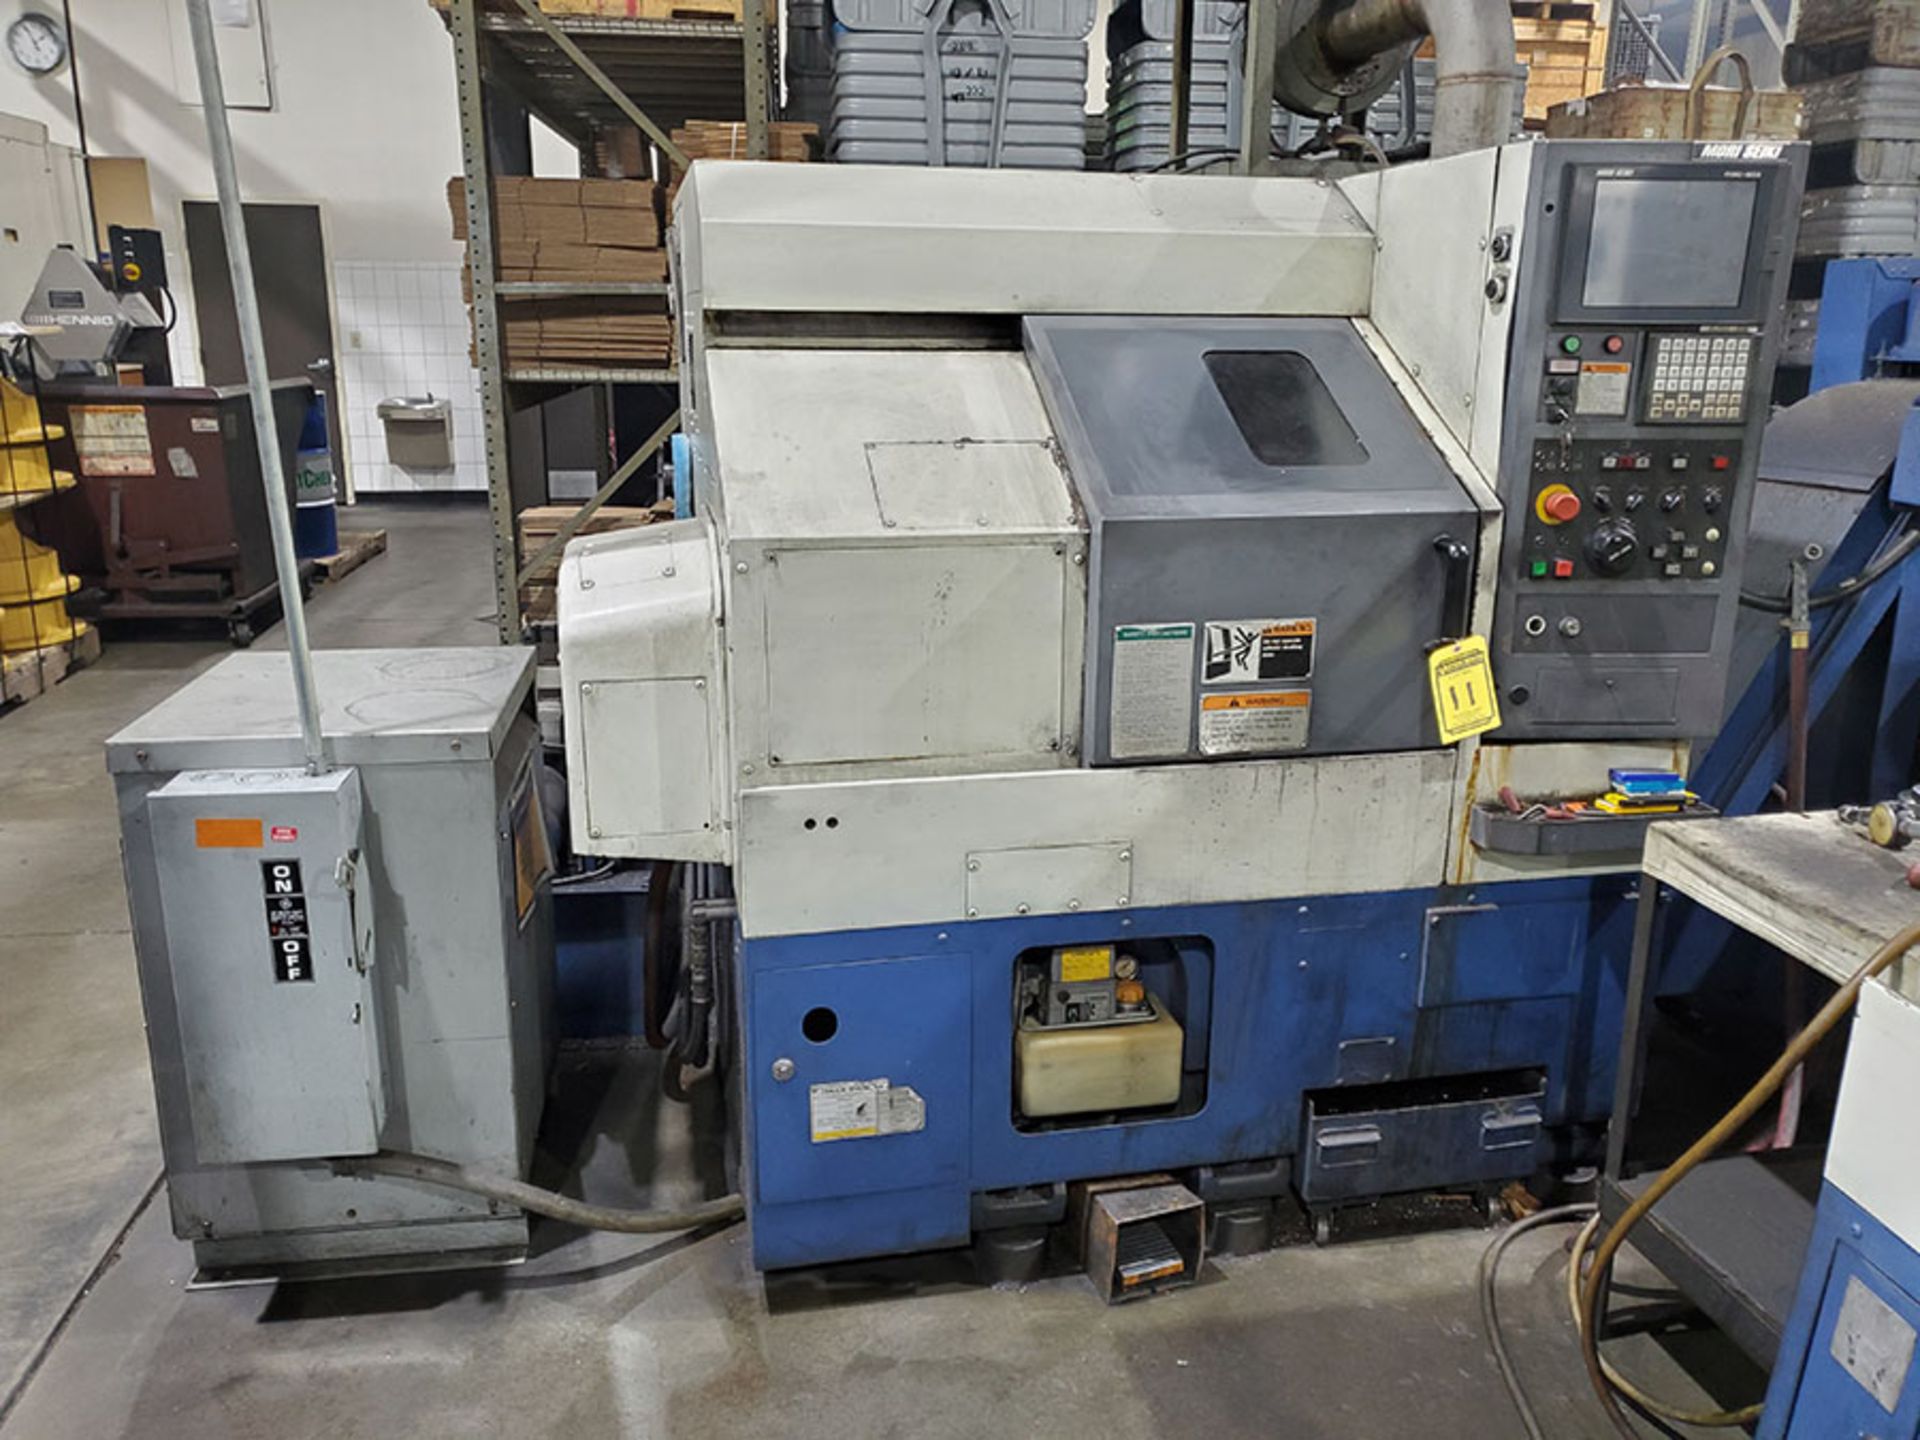 MORI-SEIKI CNC LATHE, MSC-803 DRO CNC CONTROL, MIST COLLECTOR, TURBO OUTFEED INCLINE CHIP - Image 7 of 16